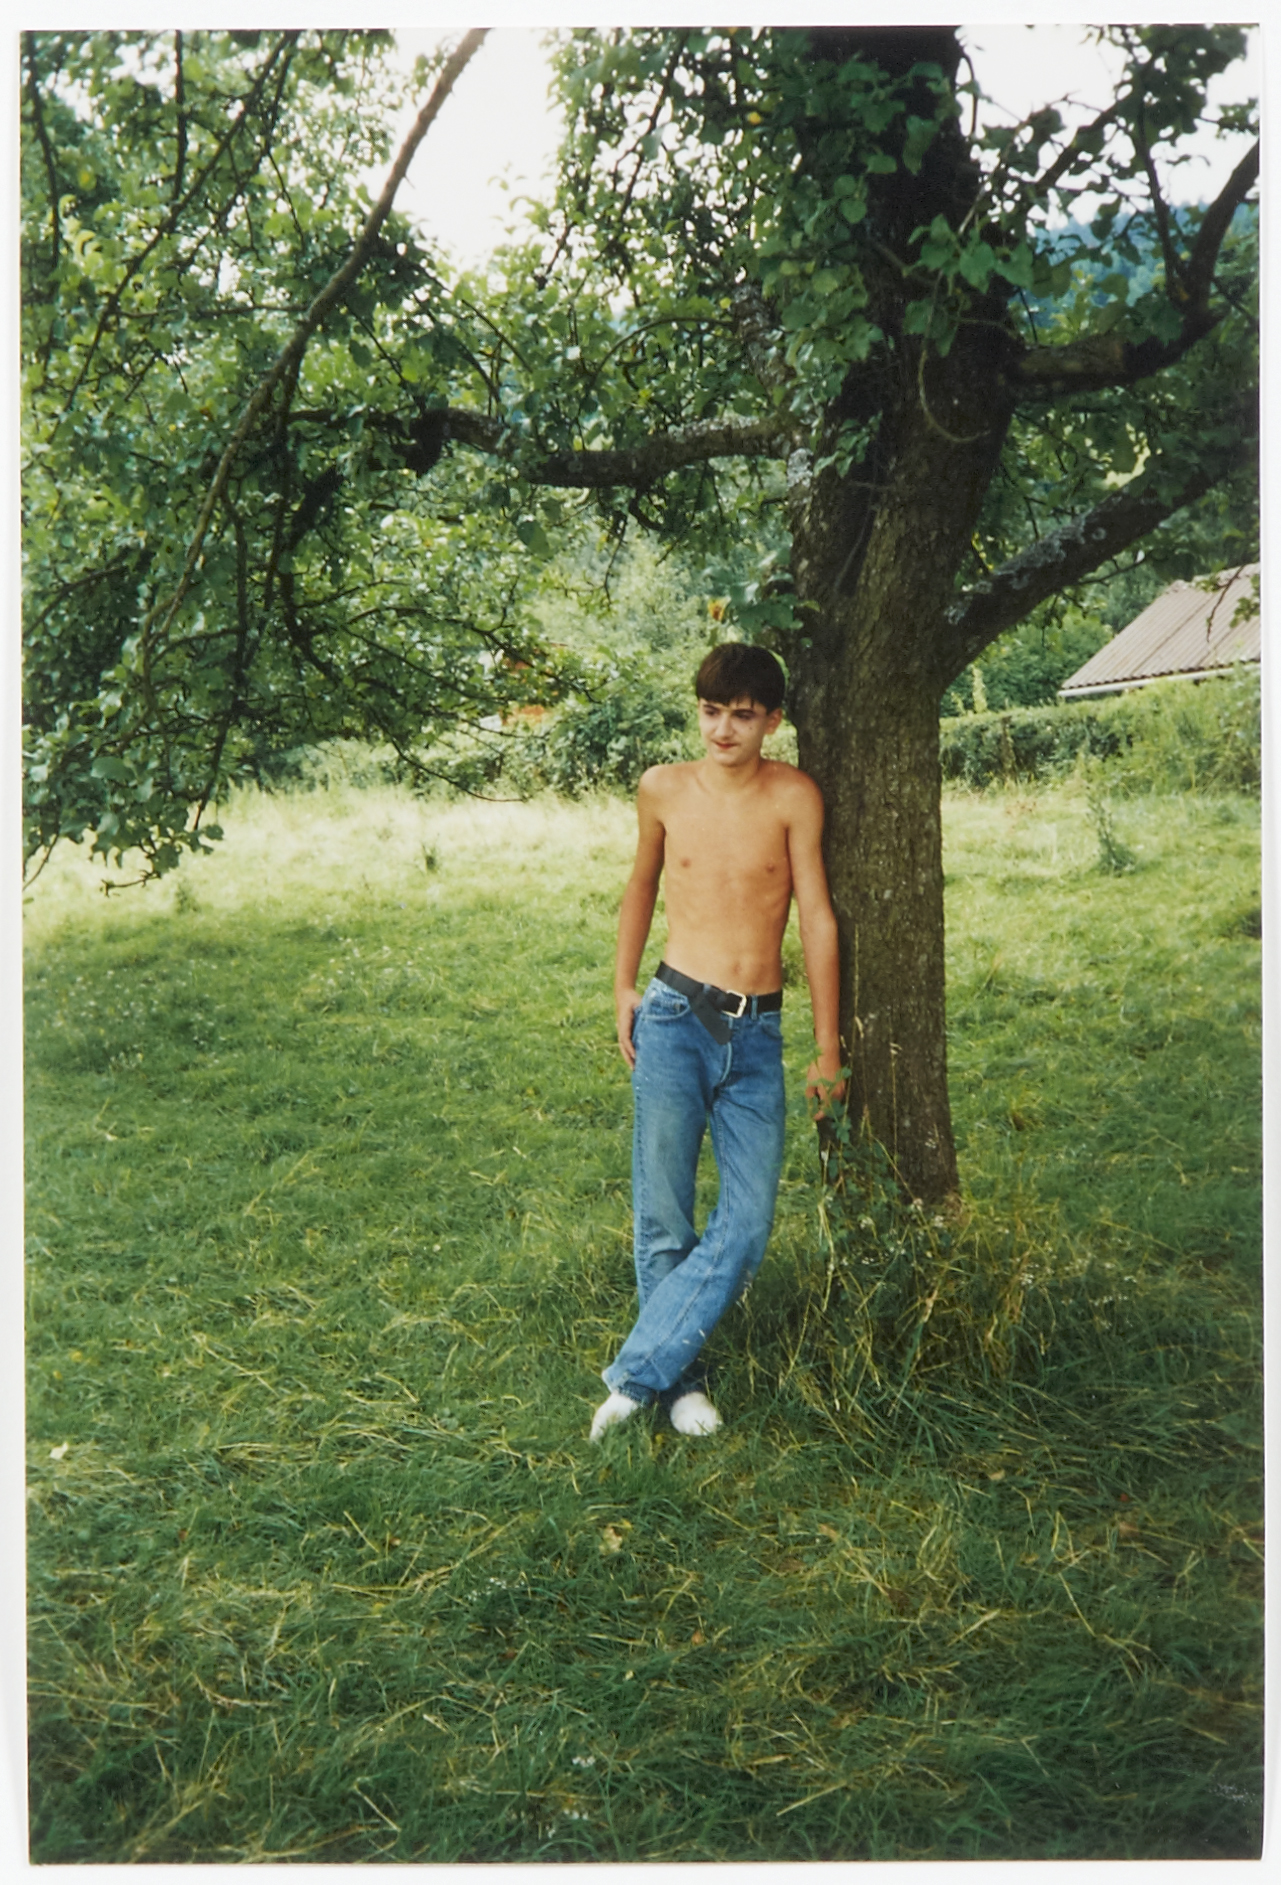 A color photograph of a light-skinned, adolescent boy wearing blue jeans and no shirt leaning upright against a green tree in an open field.